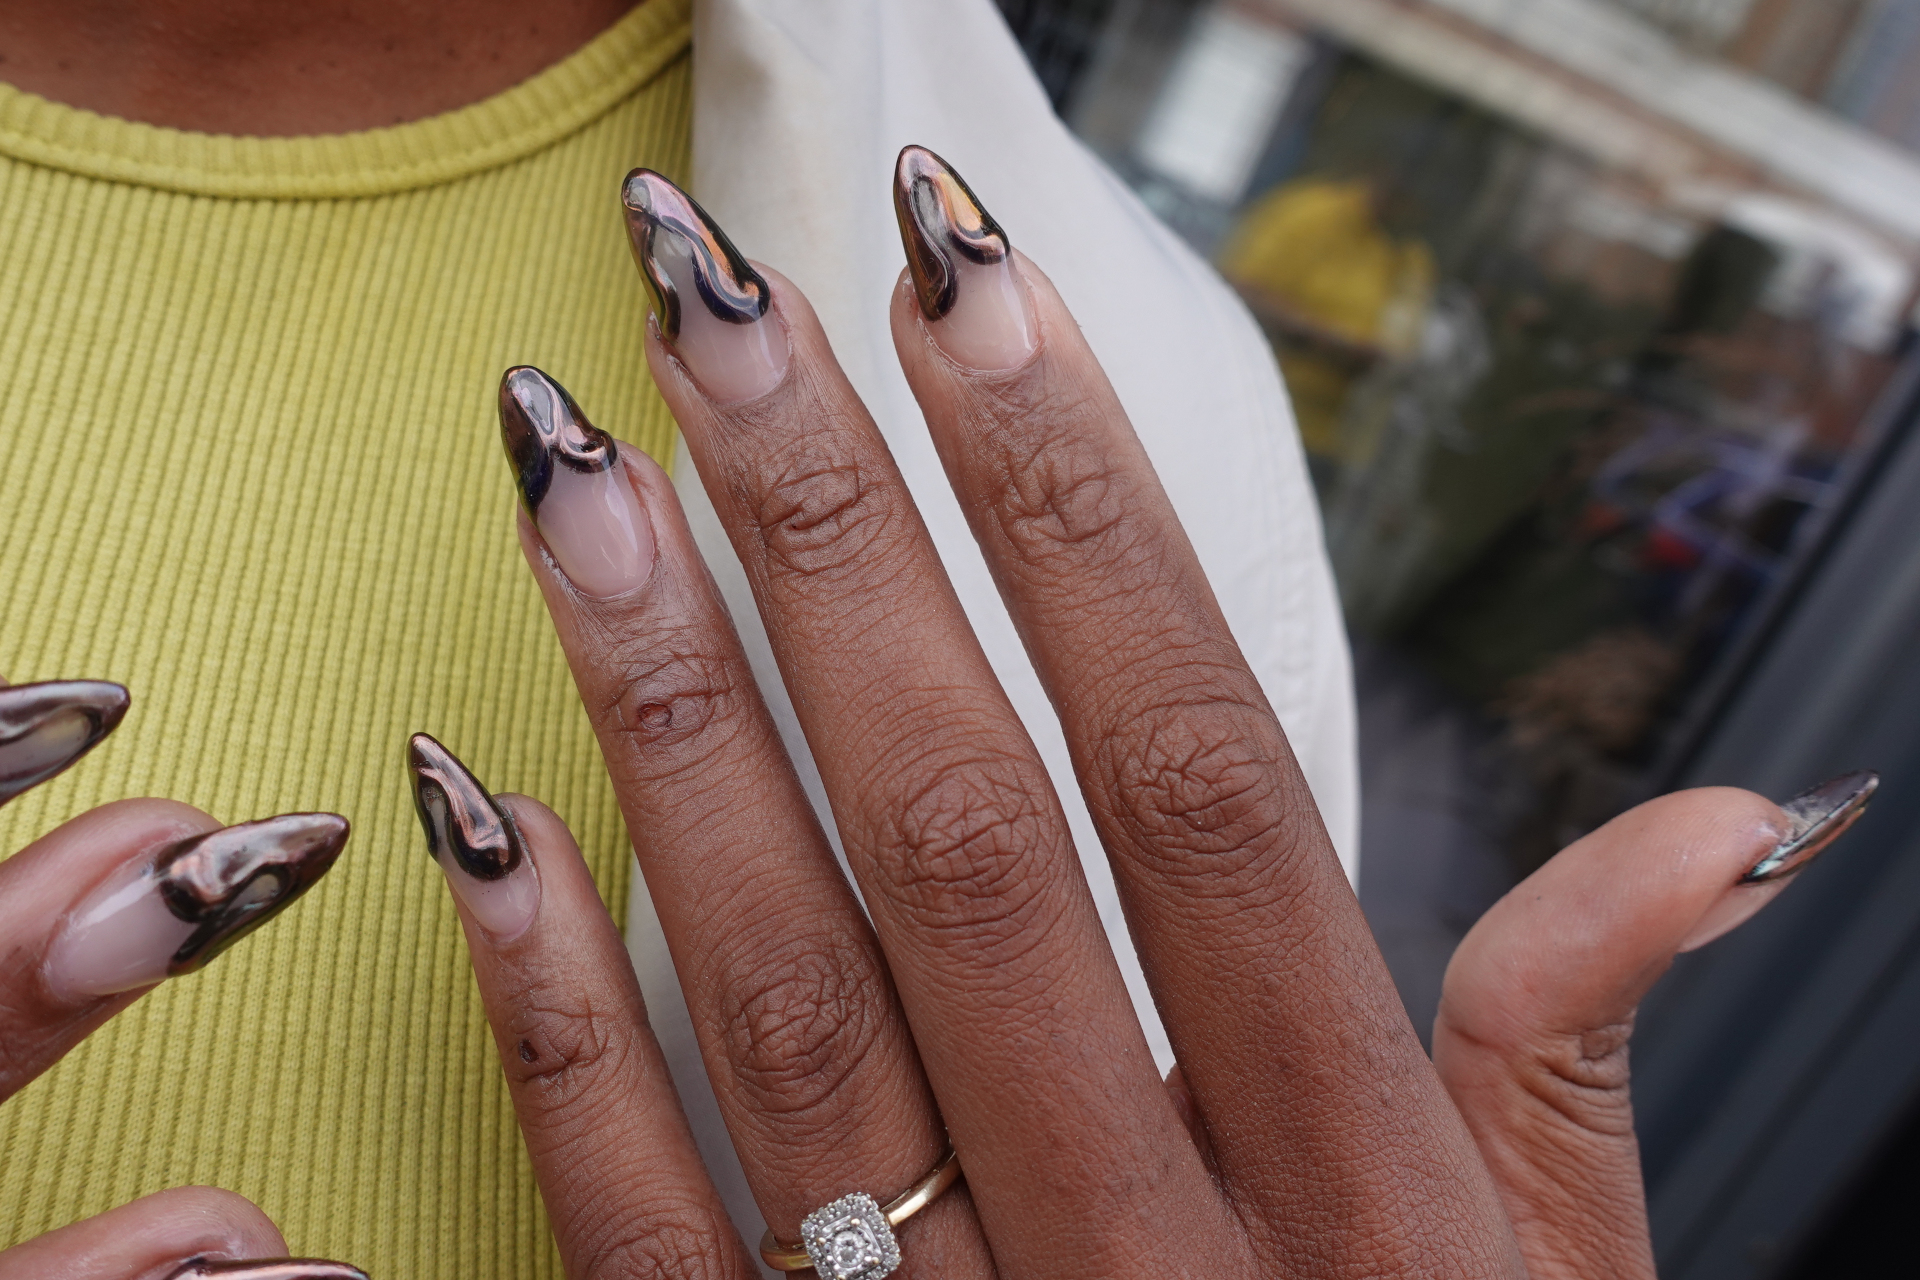 Almond Nails Are Everywhere Right Now – Here's How To Get Them